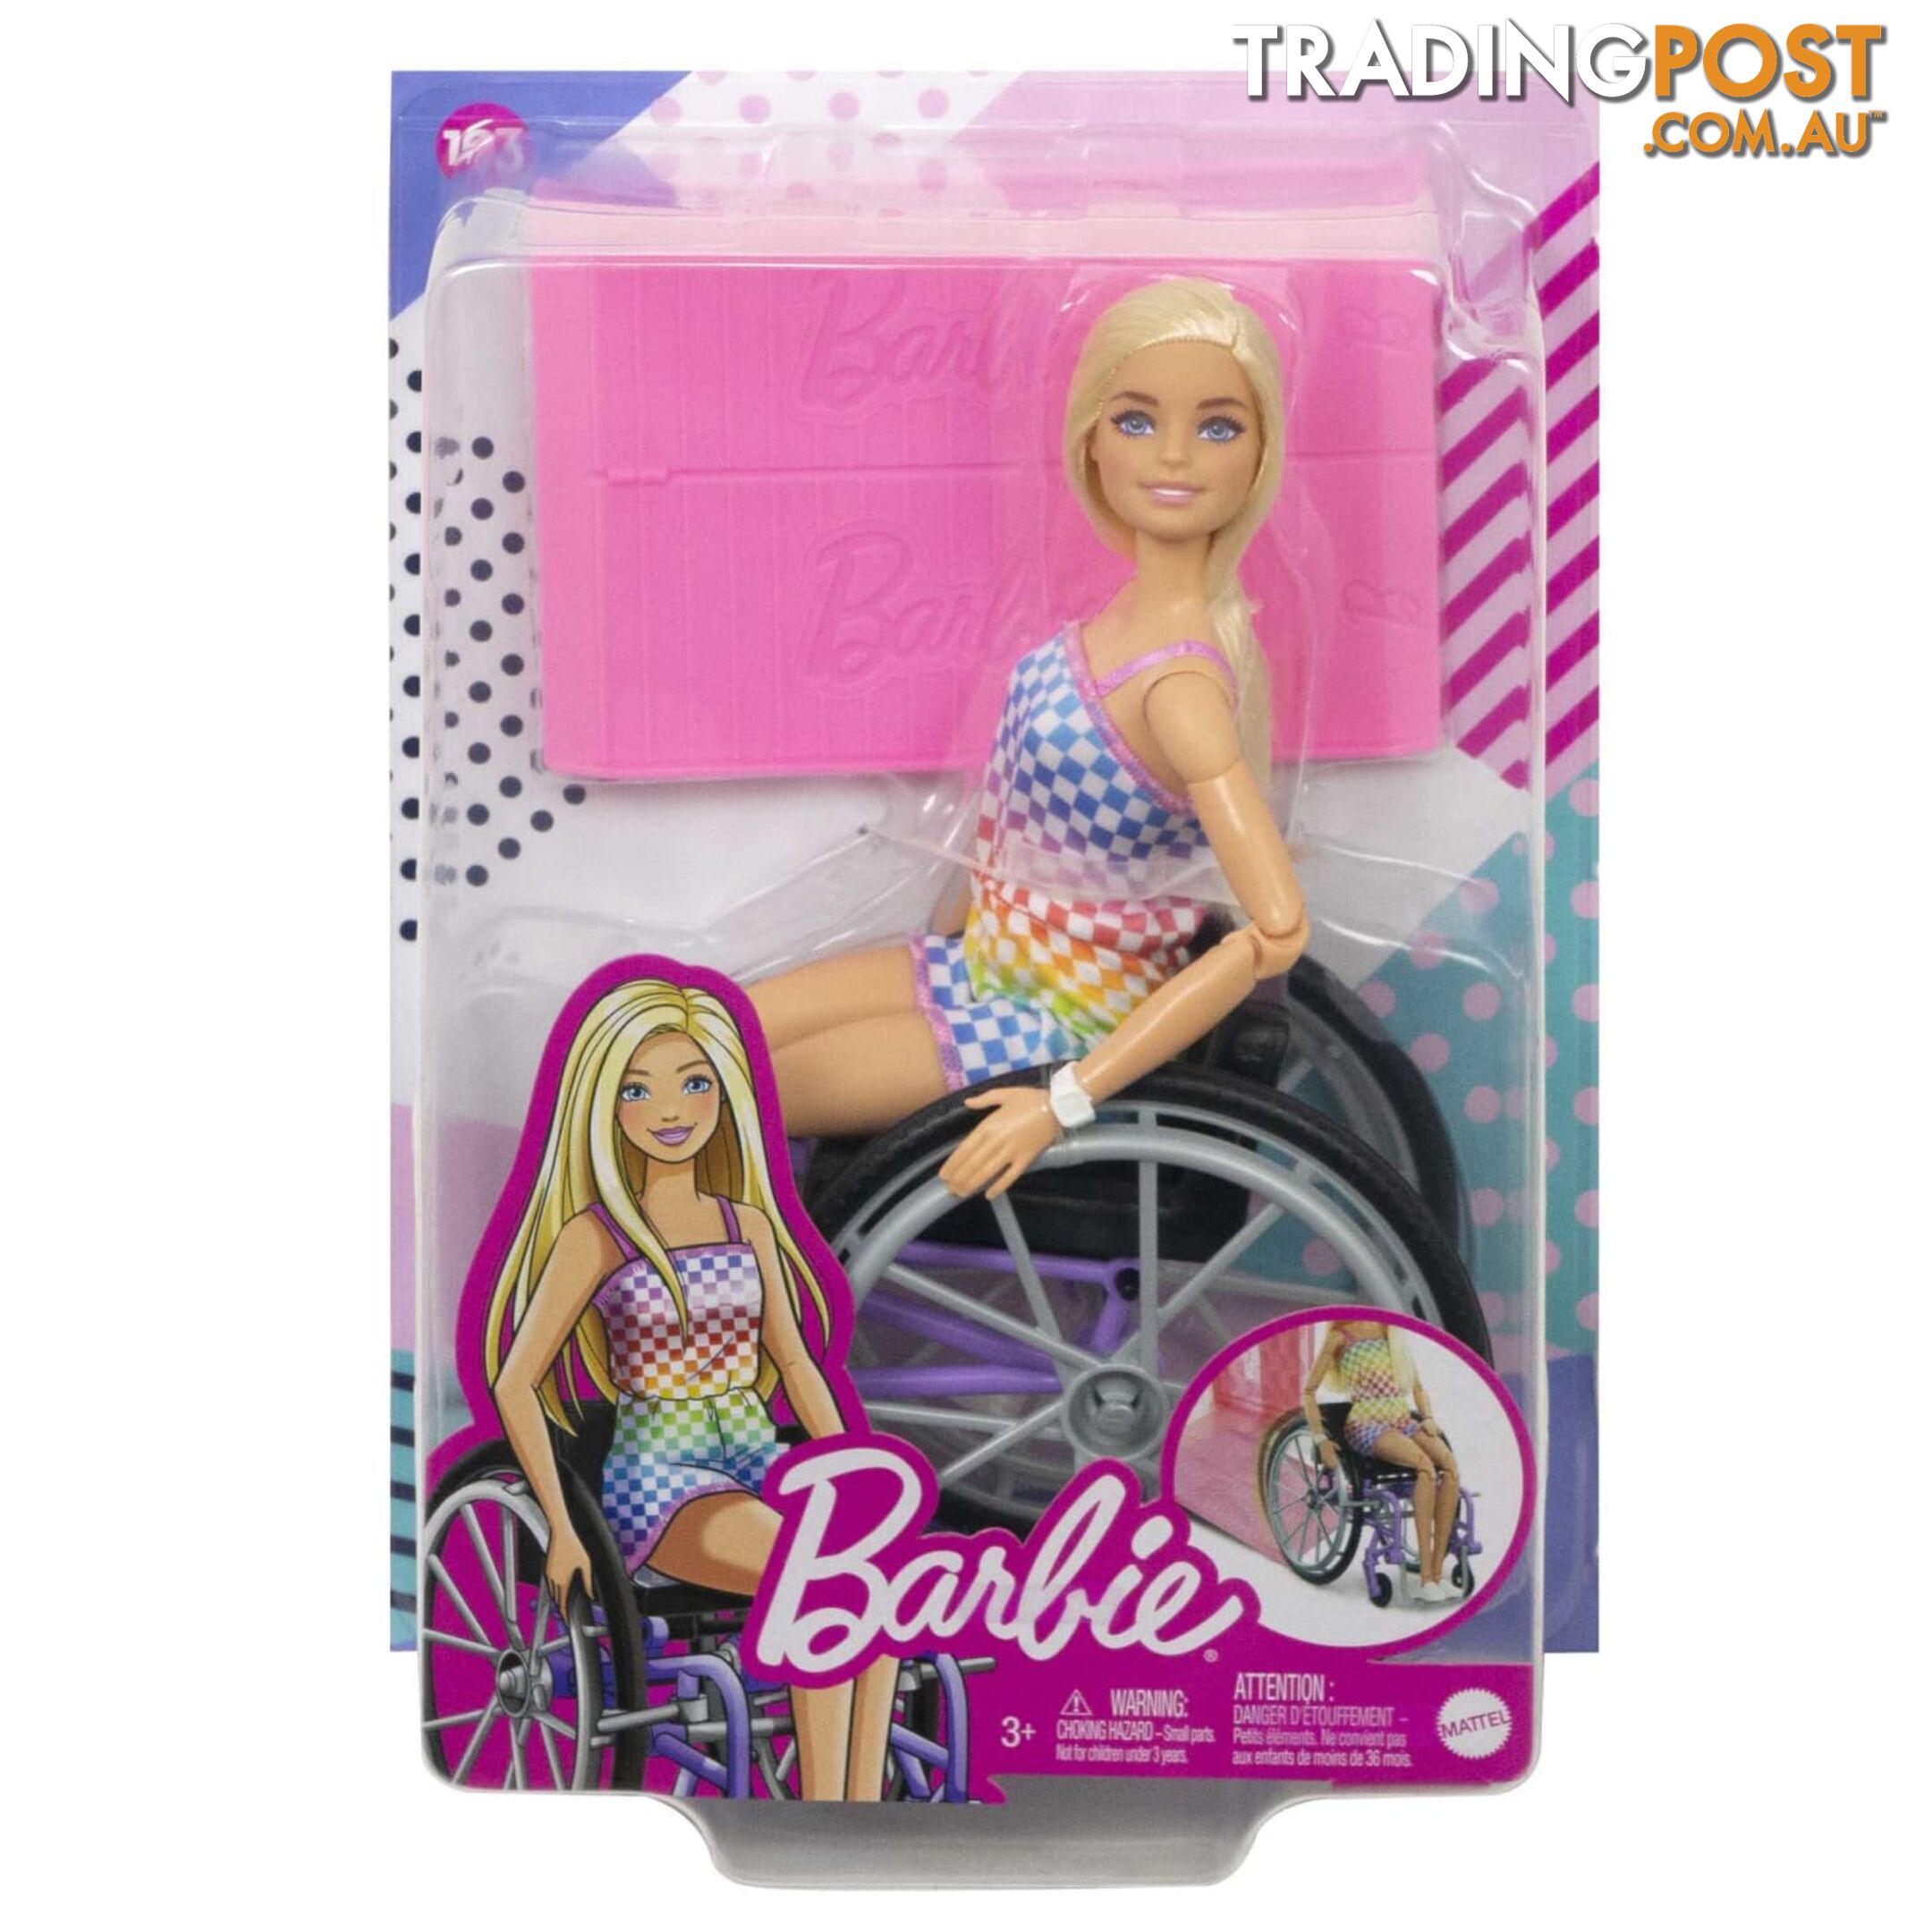 Barbie Doll With Wheelchair And Ramp Blonde Barbie Fashionistas - Mahjt13 - 194735094127